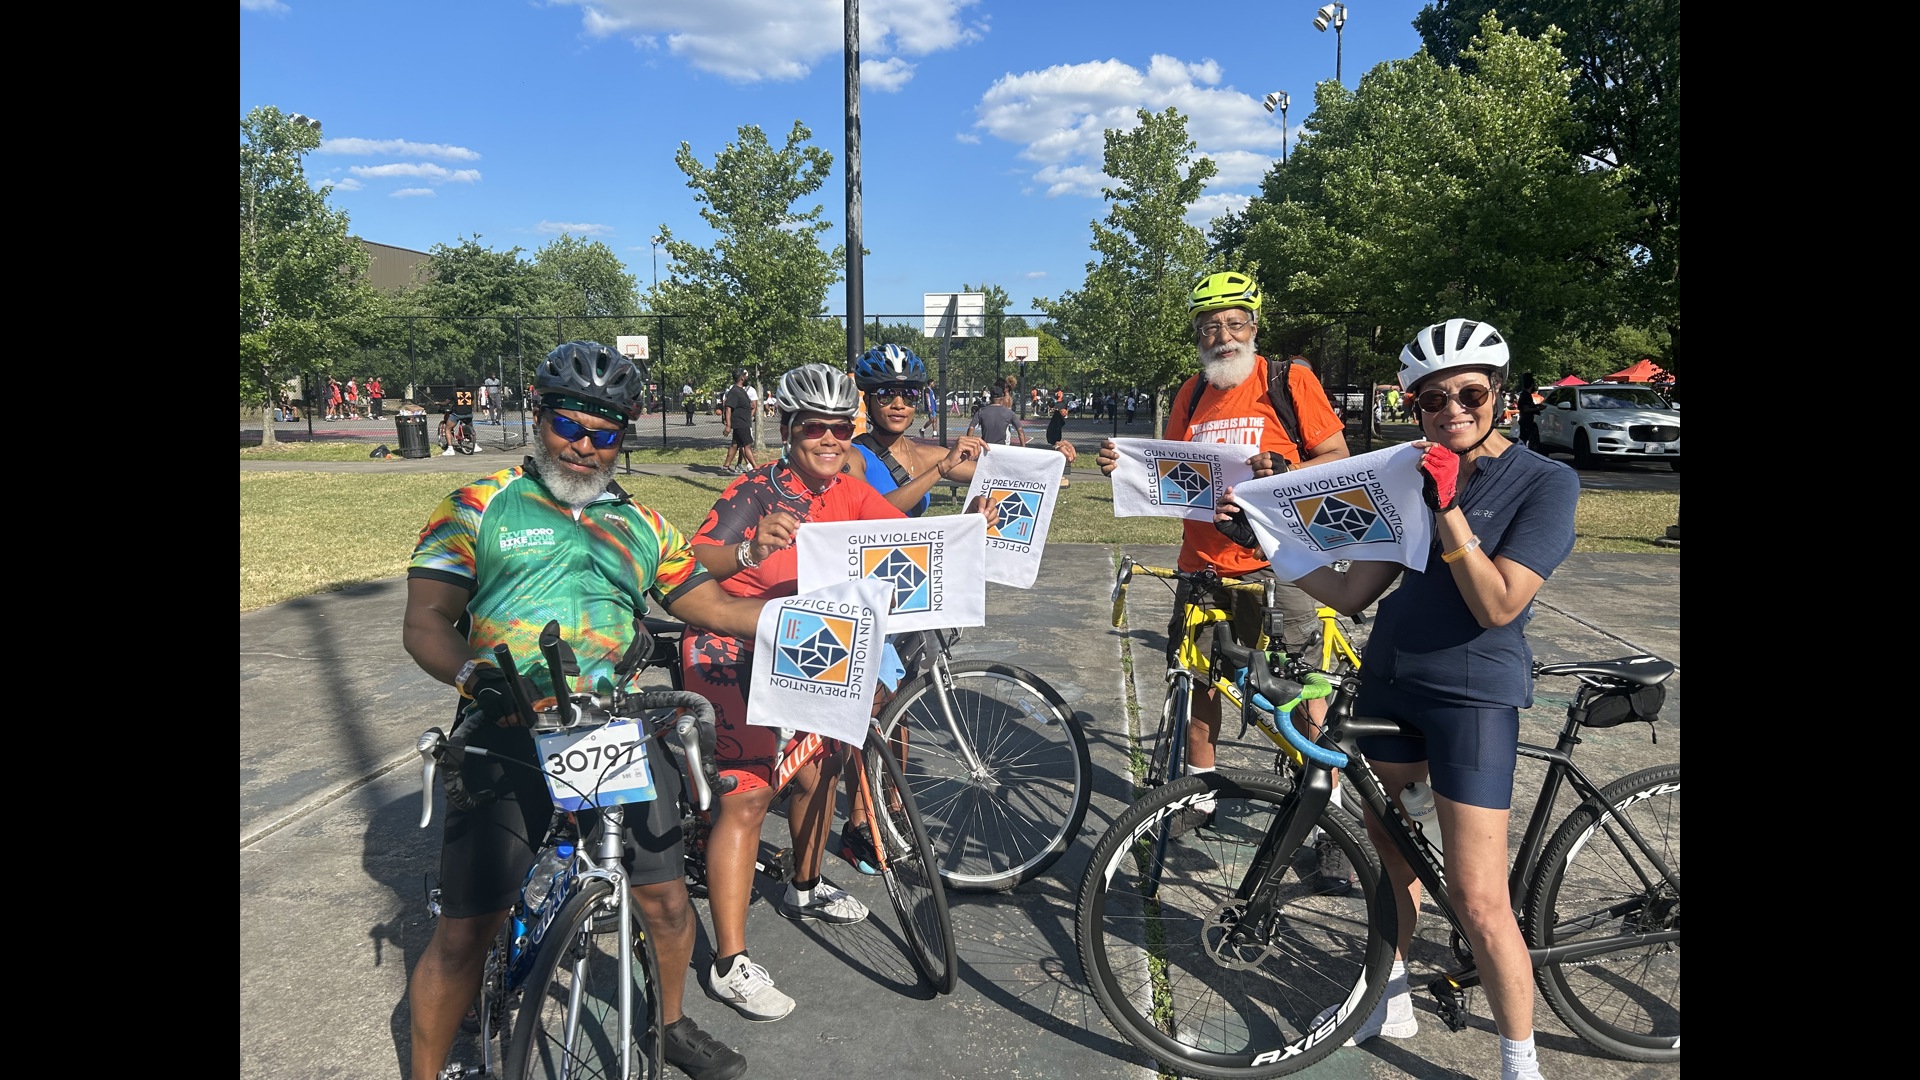 Cycle for Change aims to offer support and curb gun violence after another violent week.